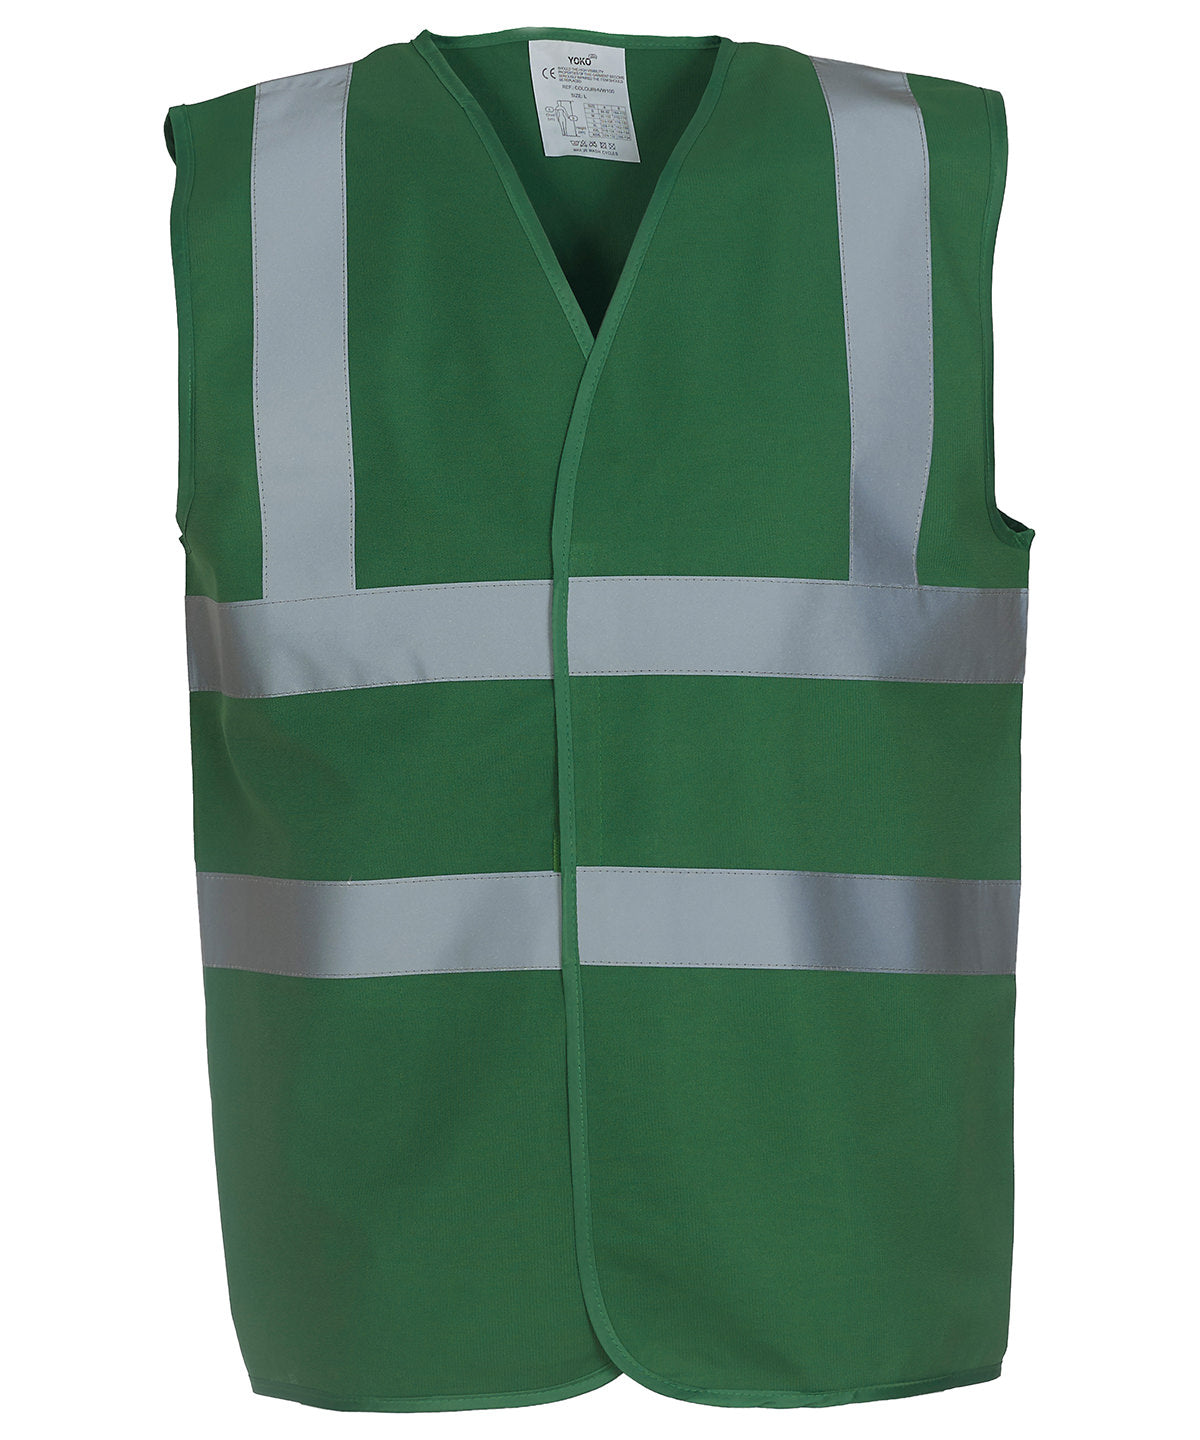 Personalised Safety Vests - Mid Yellow Yoko Hi-vis 2-band-and-braces waistcoat (HVW100)